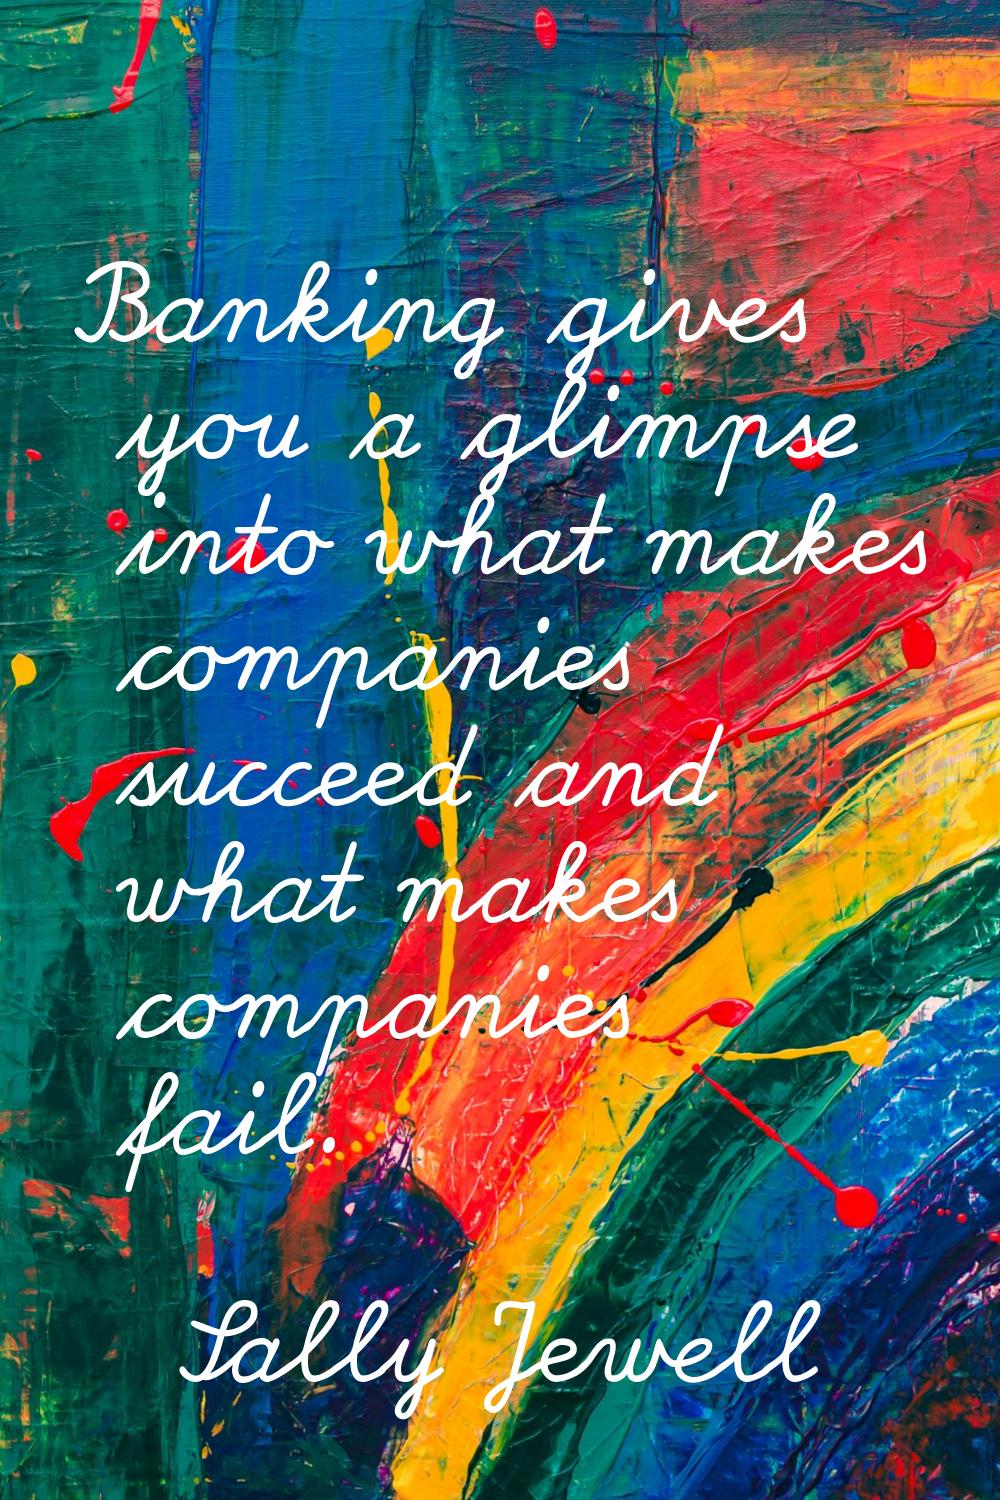 Banking gives you a glimpse into what makes companies succeed and what makes companies fail.